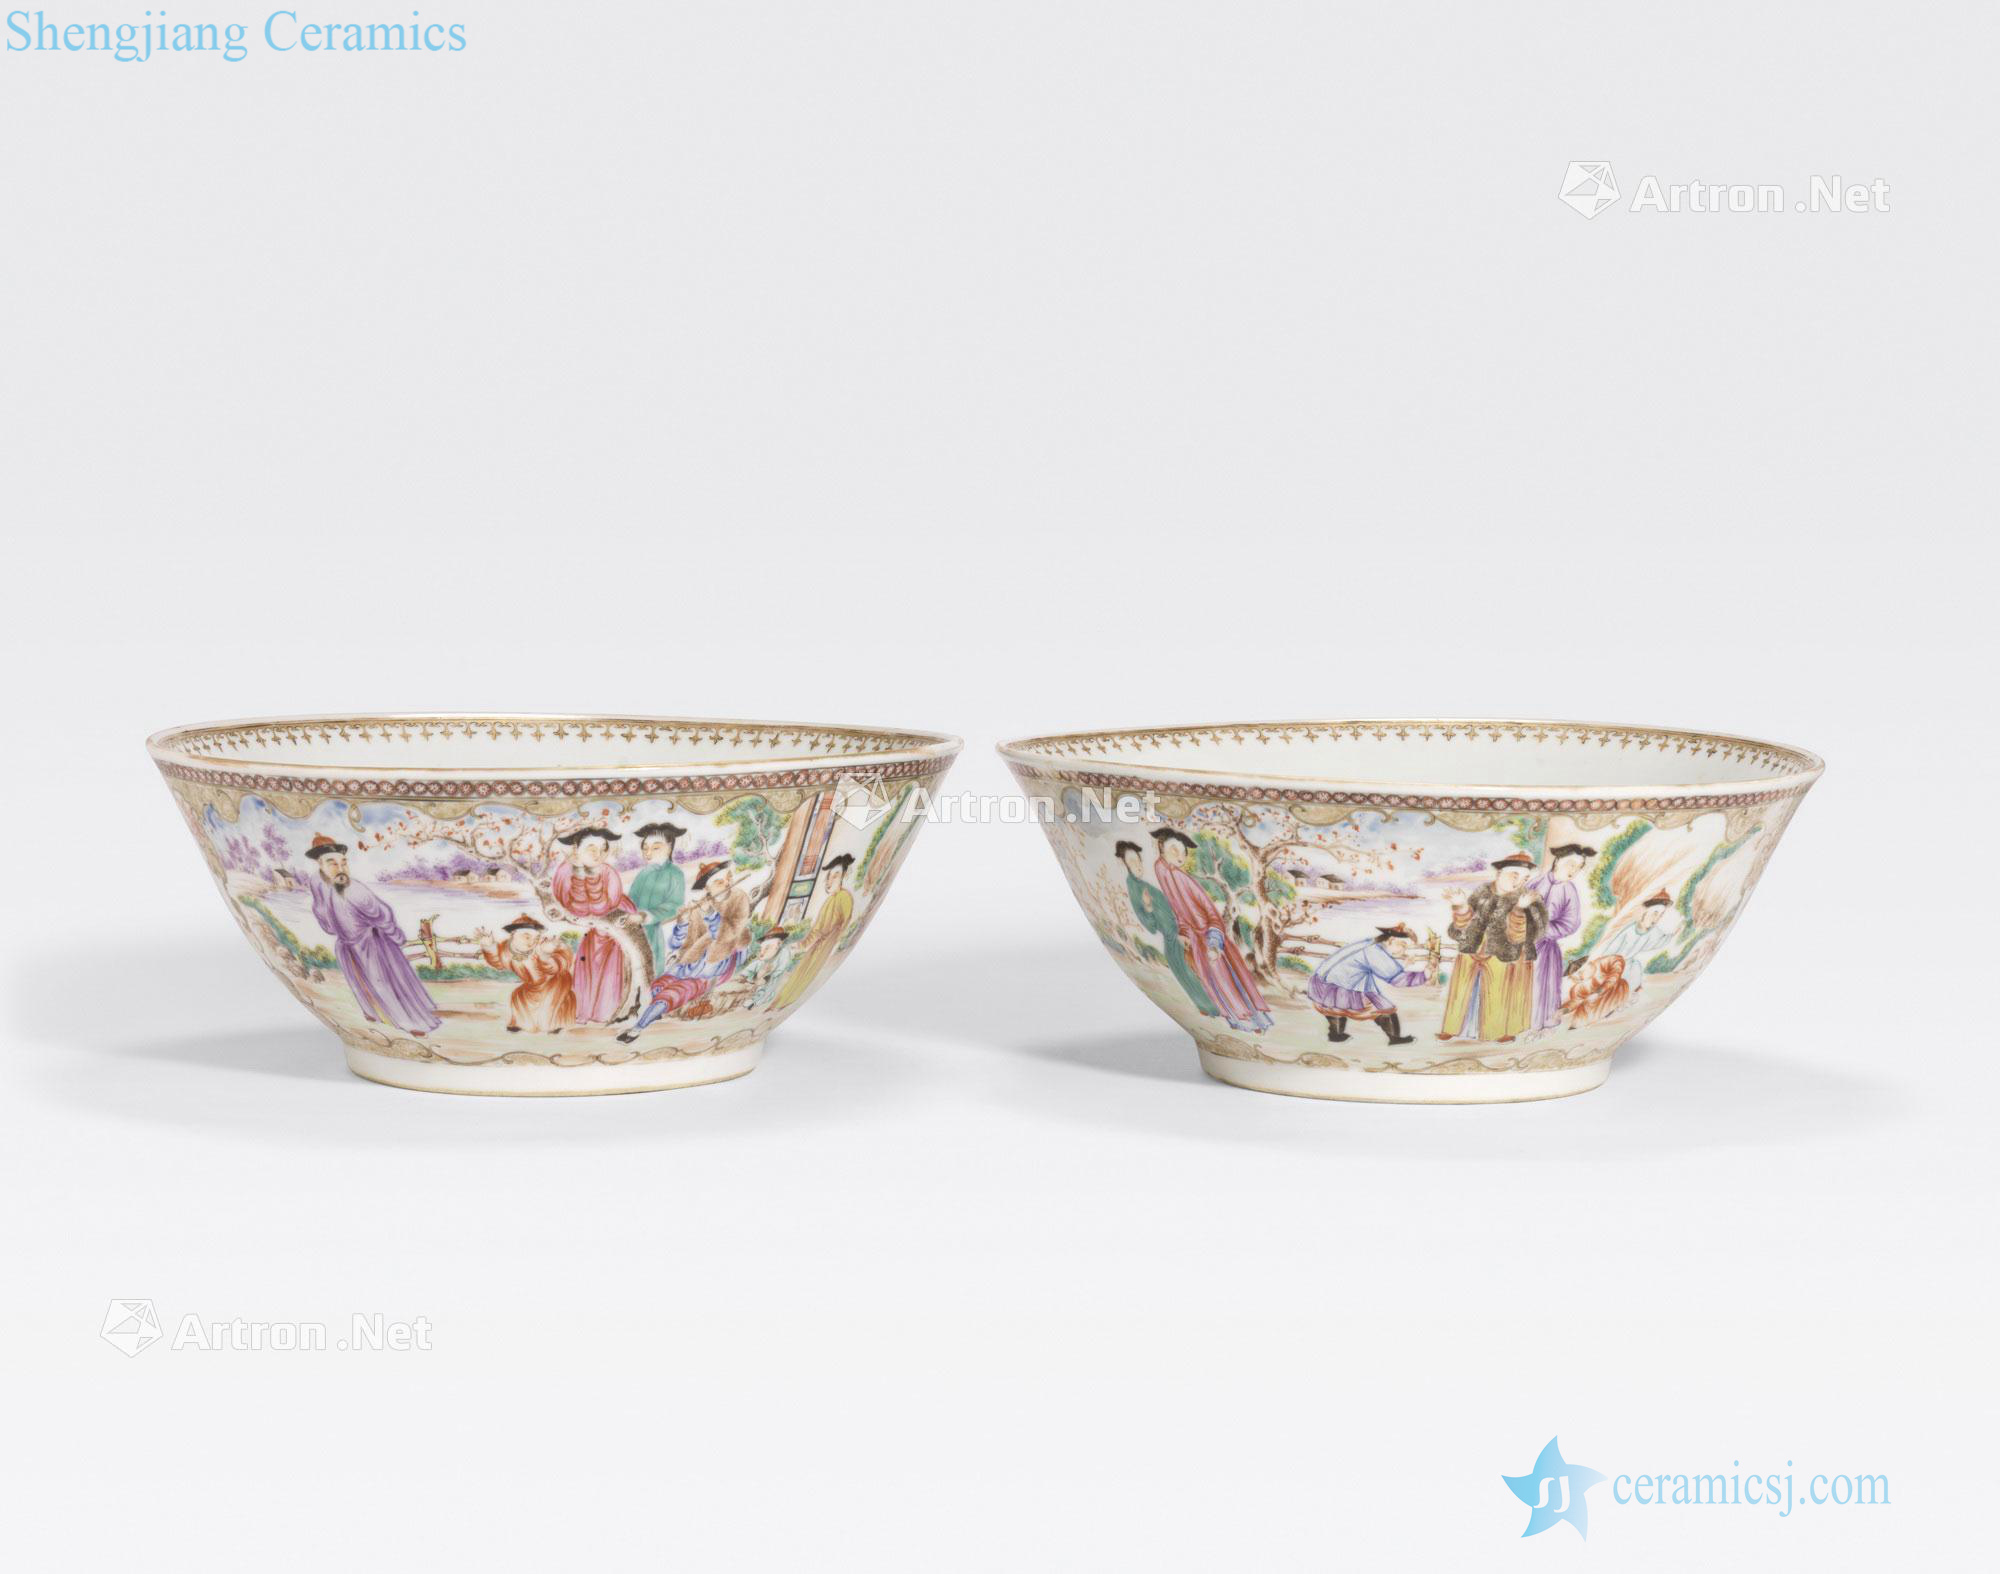 Circa 1800 A PAIR OF FAMILLE ROSE EXPORT PORCELAIN BOWLS WITH FIGURAL DECORATION